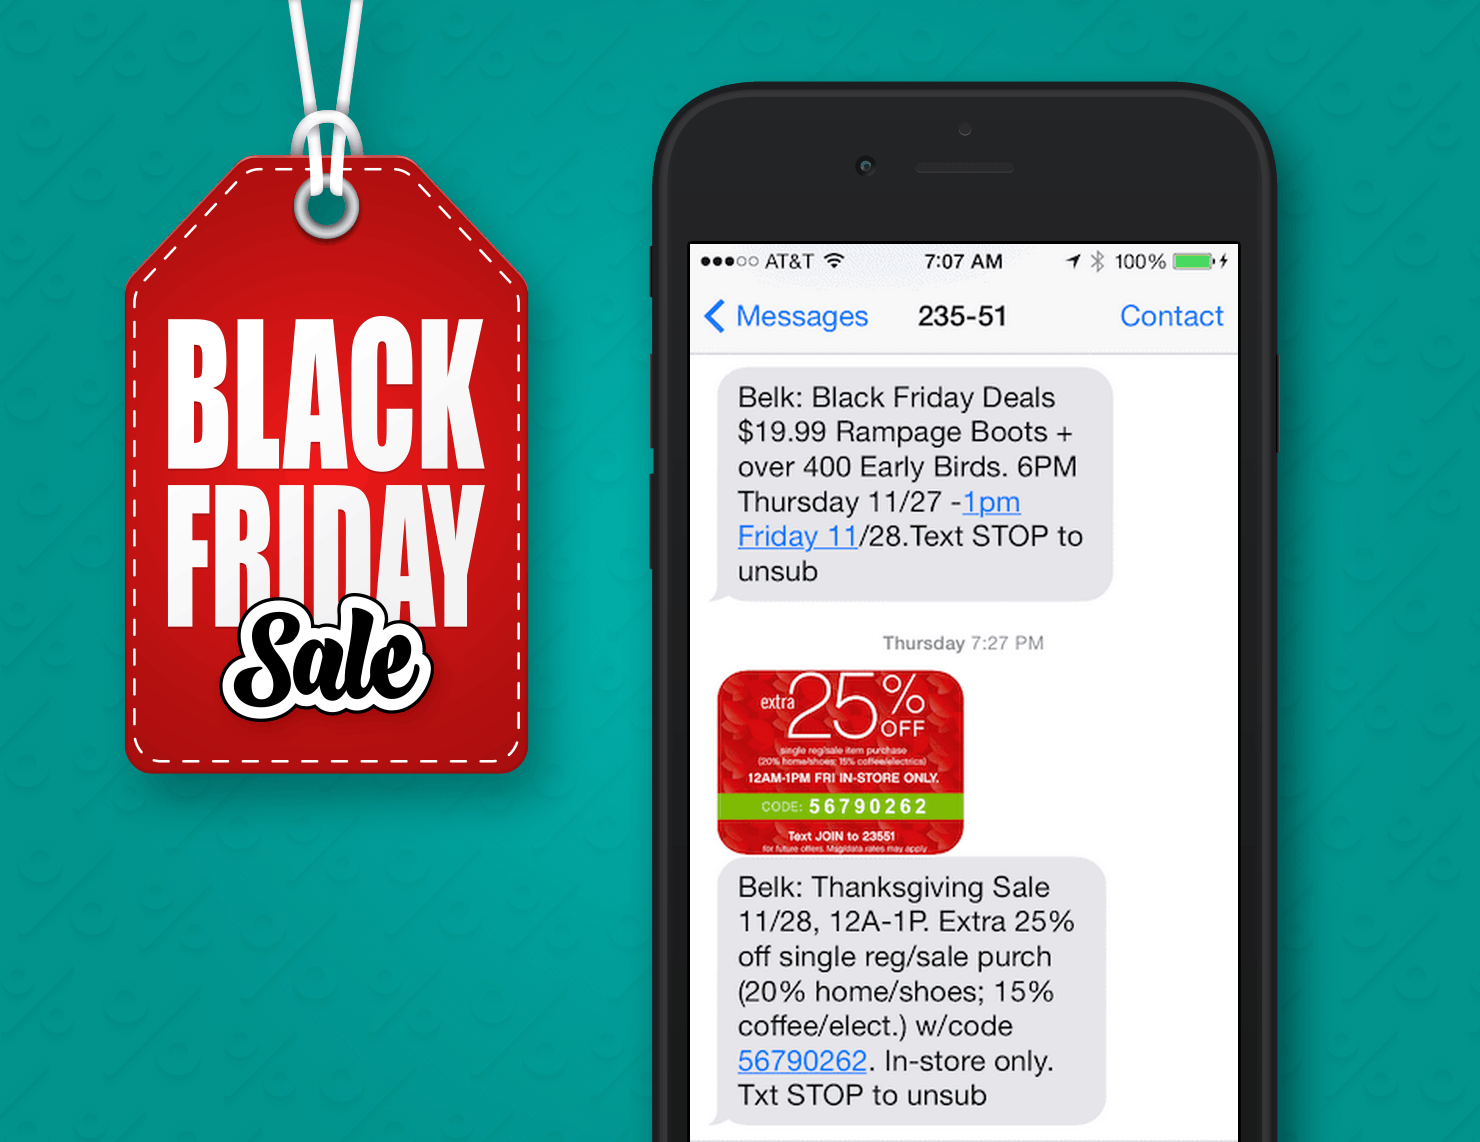 Black Friday SMS Marketing Example From Belk